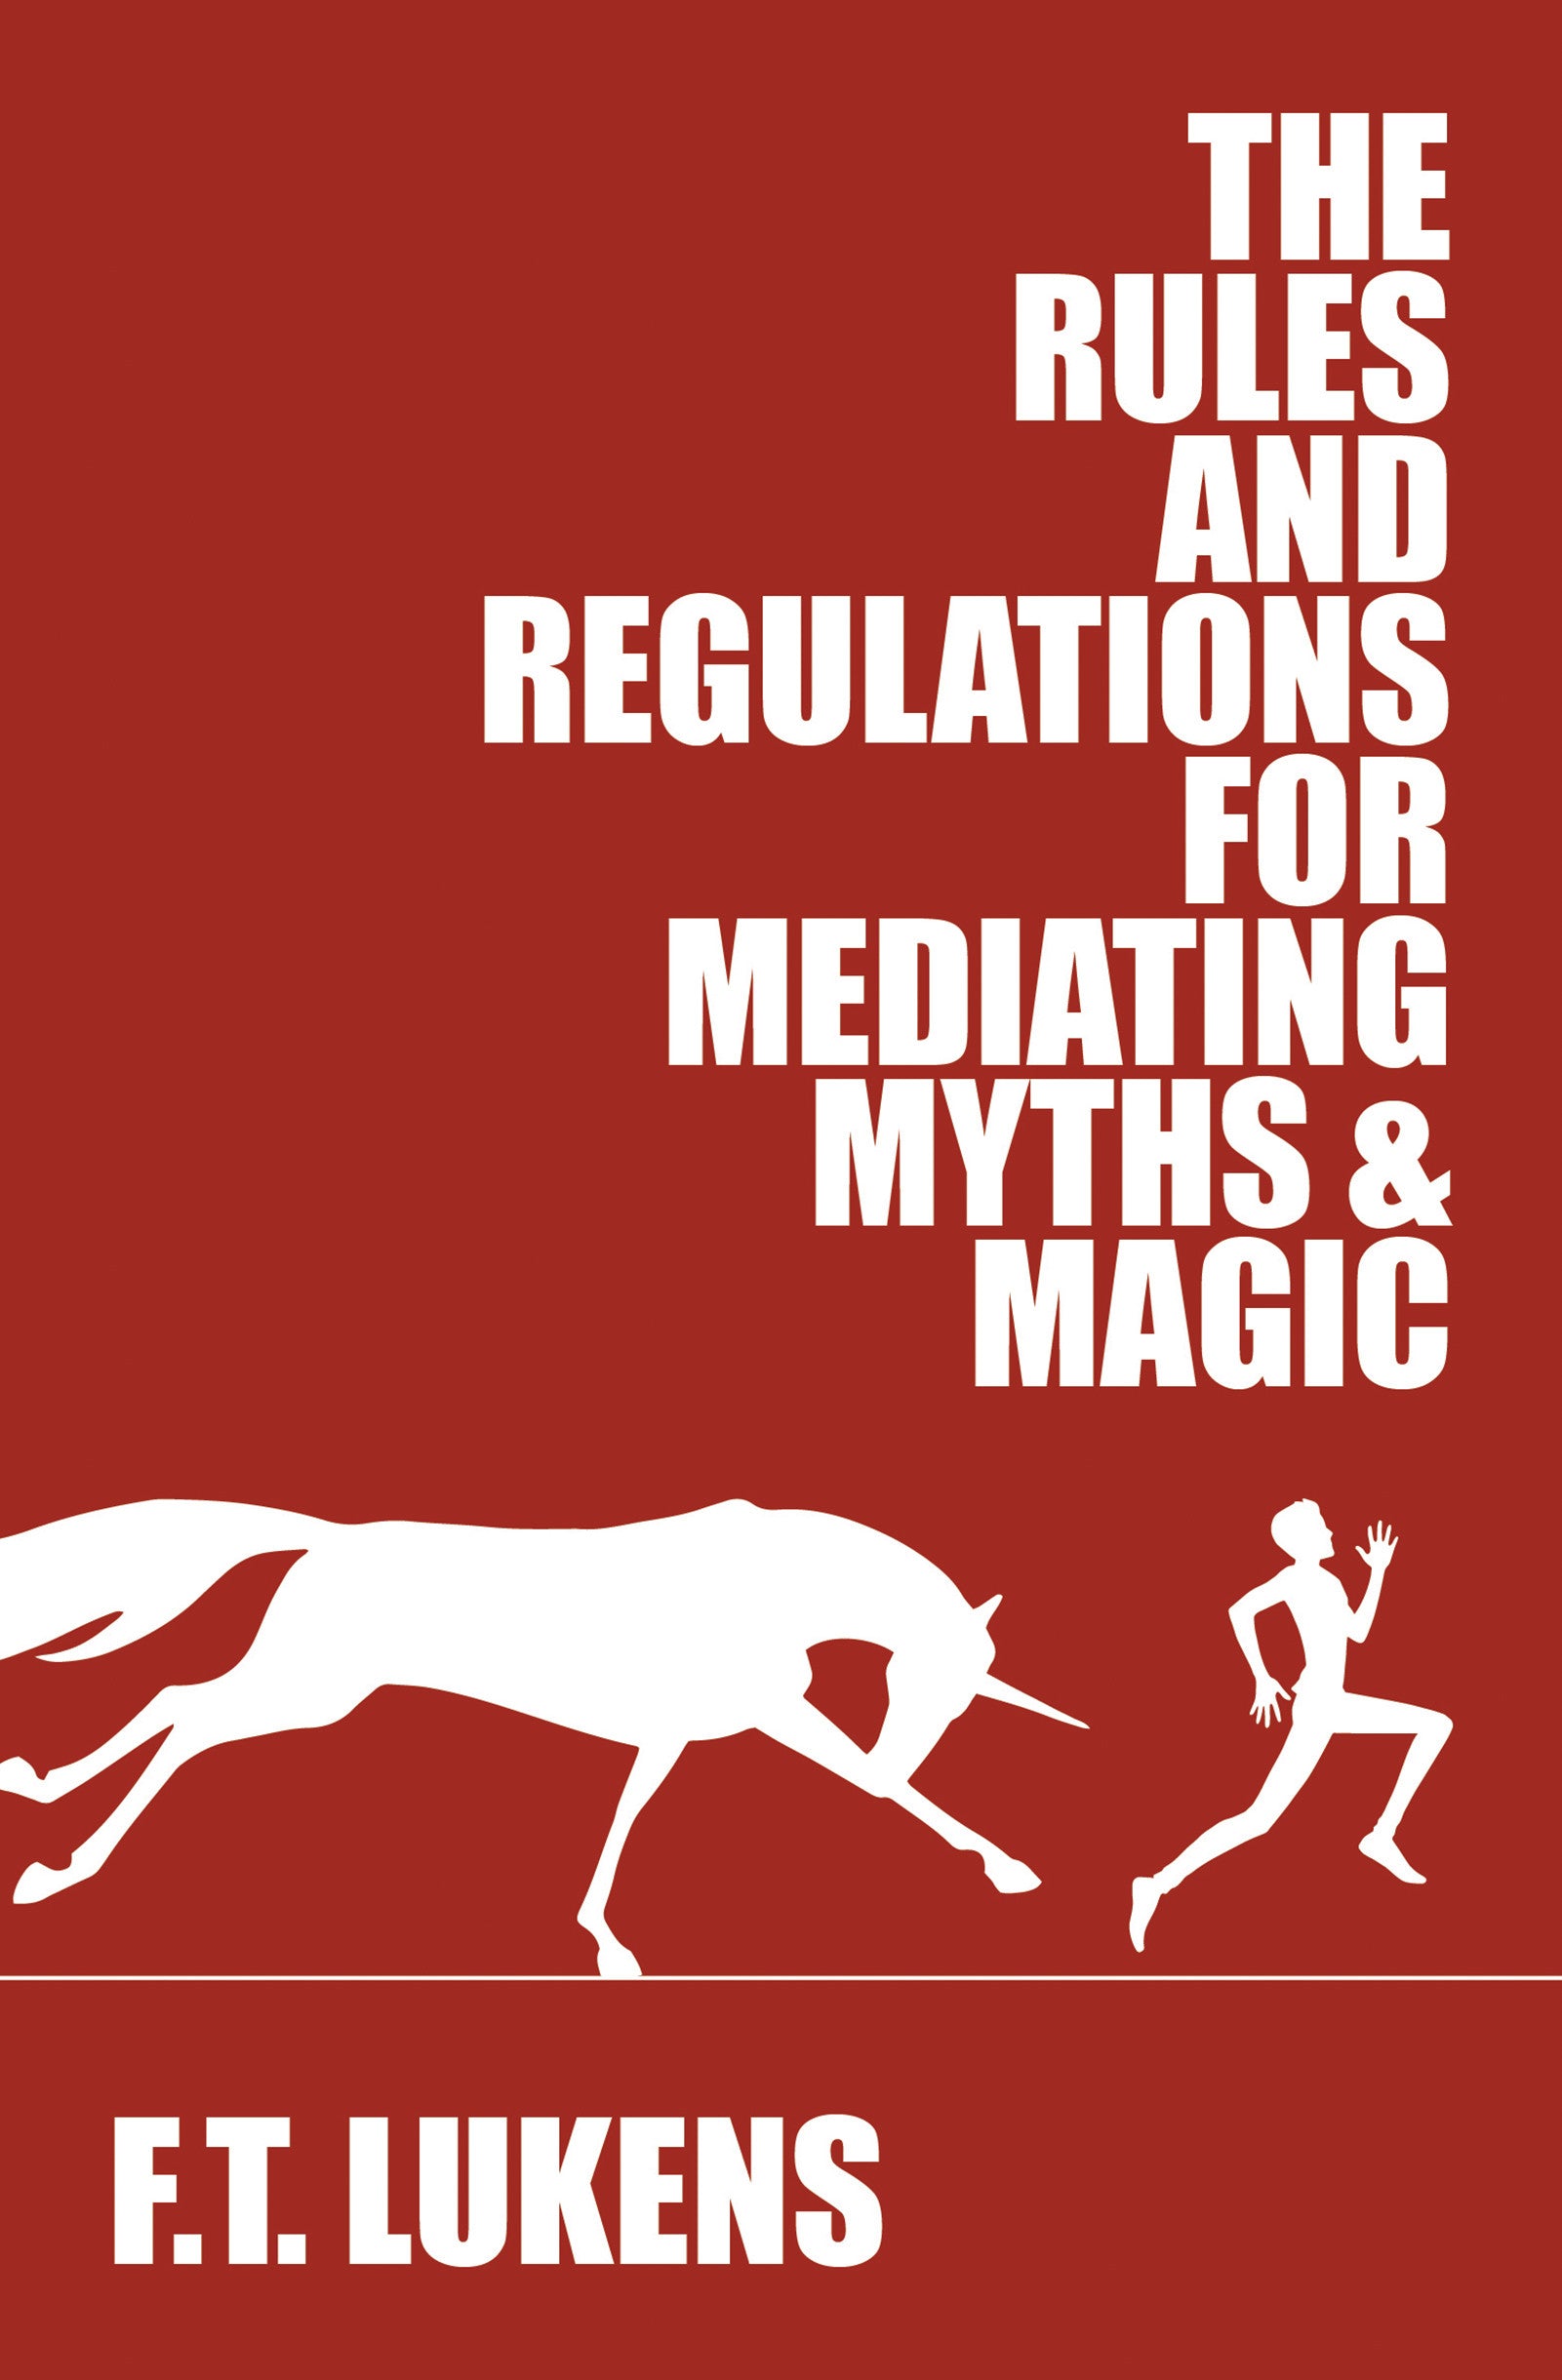 The Rules and Regulations for Mediating Myths & Magic (eBook package)